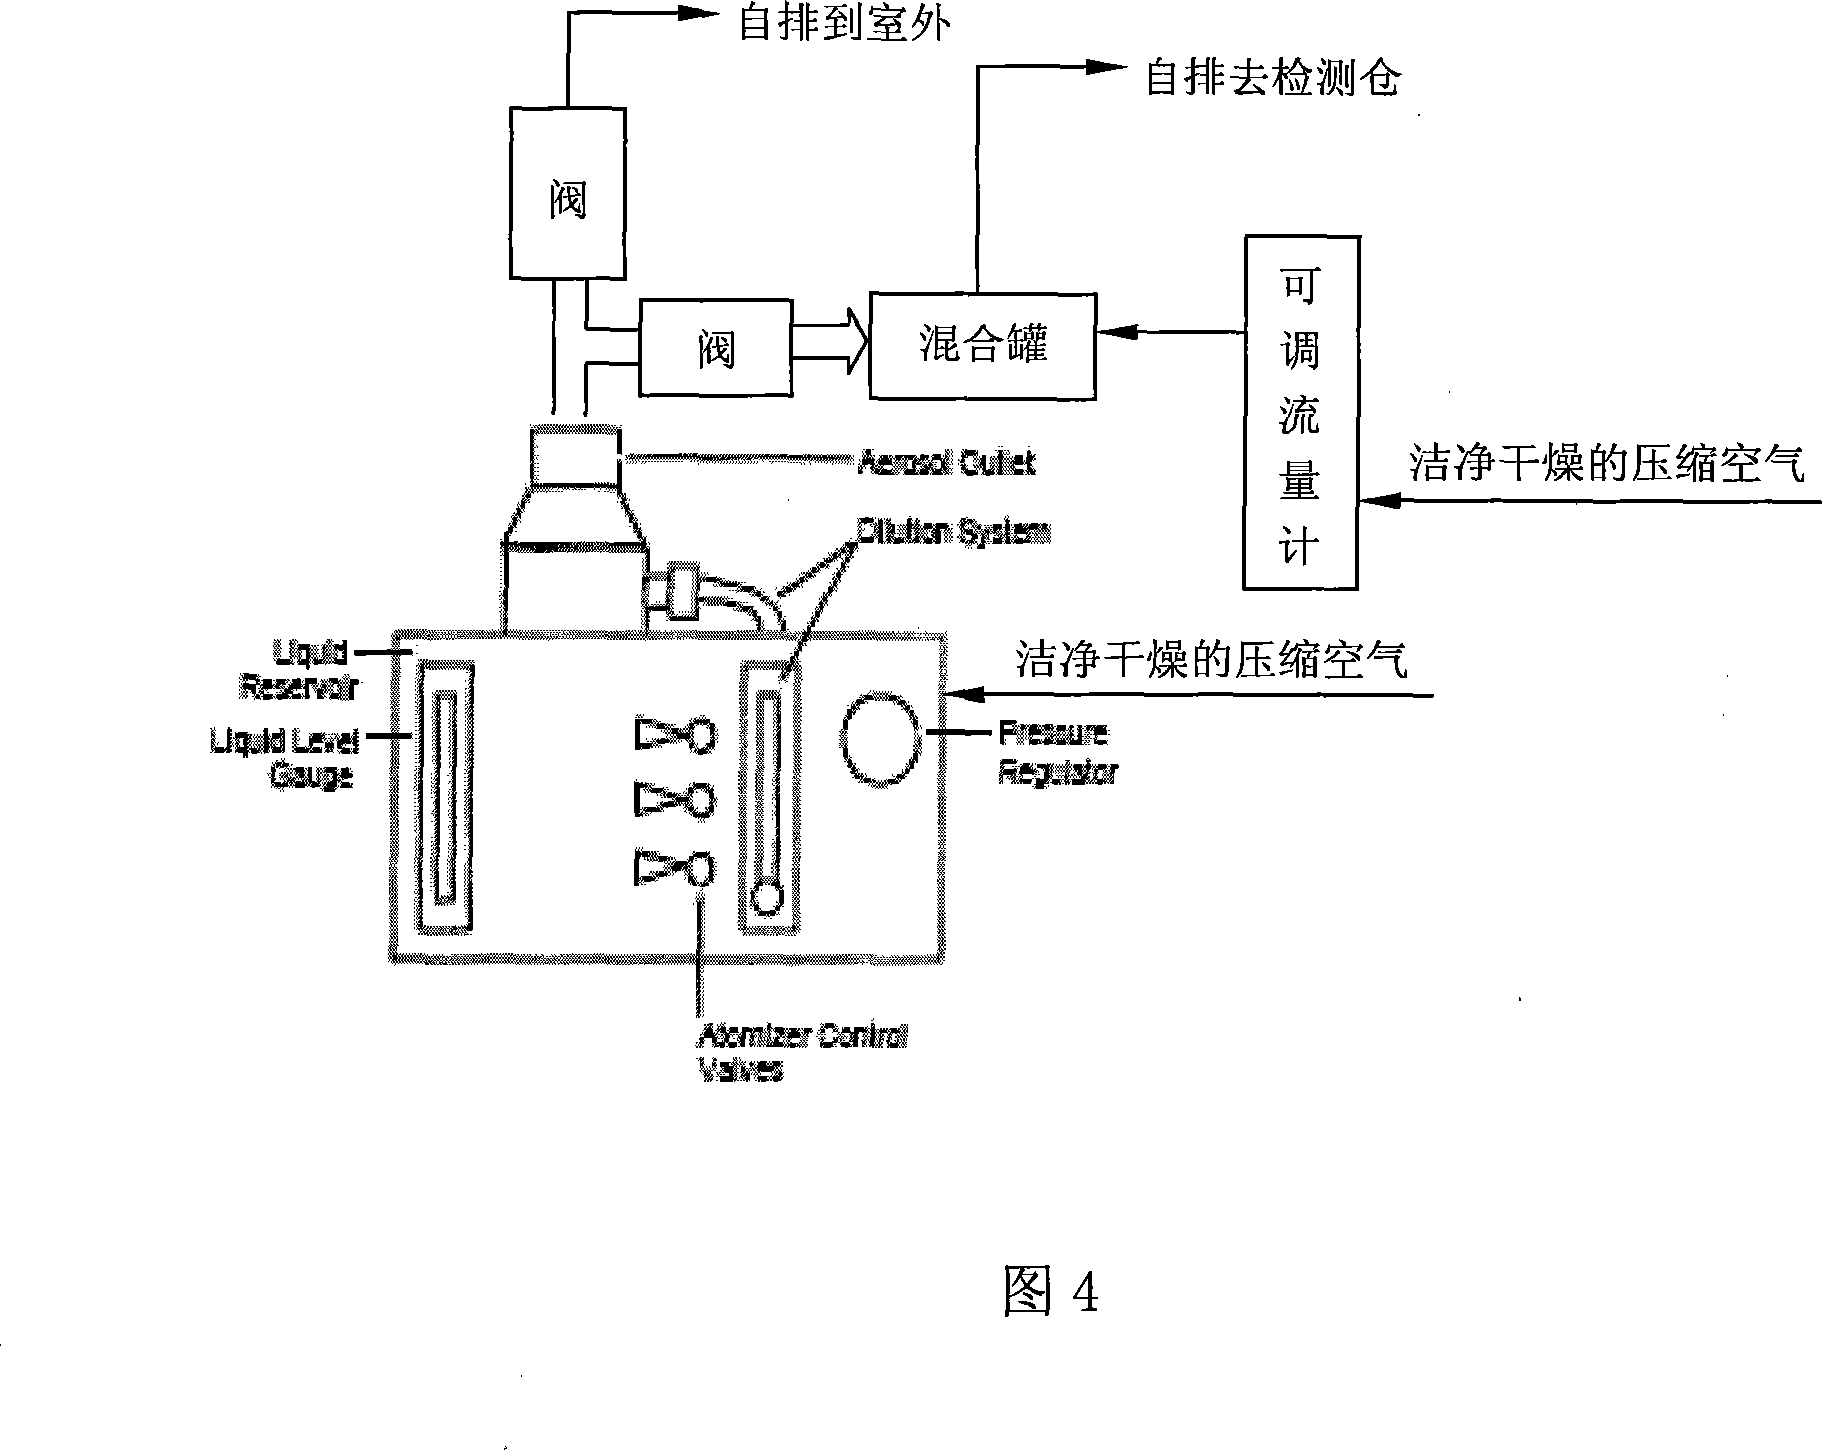 Suction-self filtering type against particle respirator filtration efficiency and leakage testing apparatus as well as detecting method